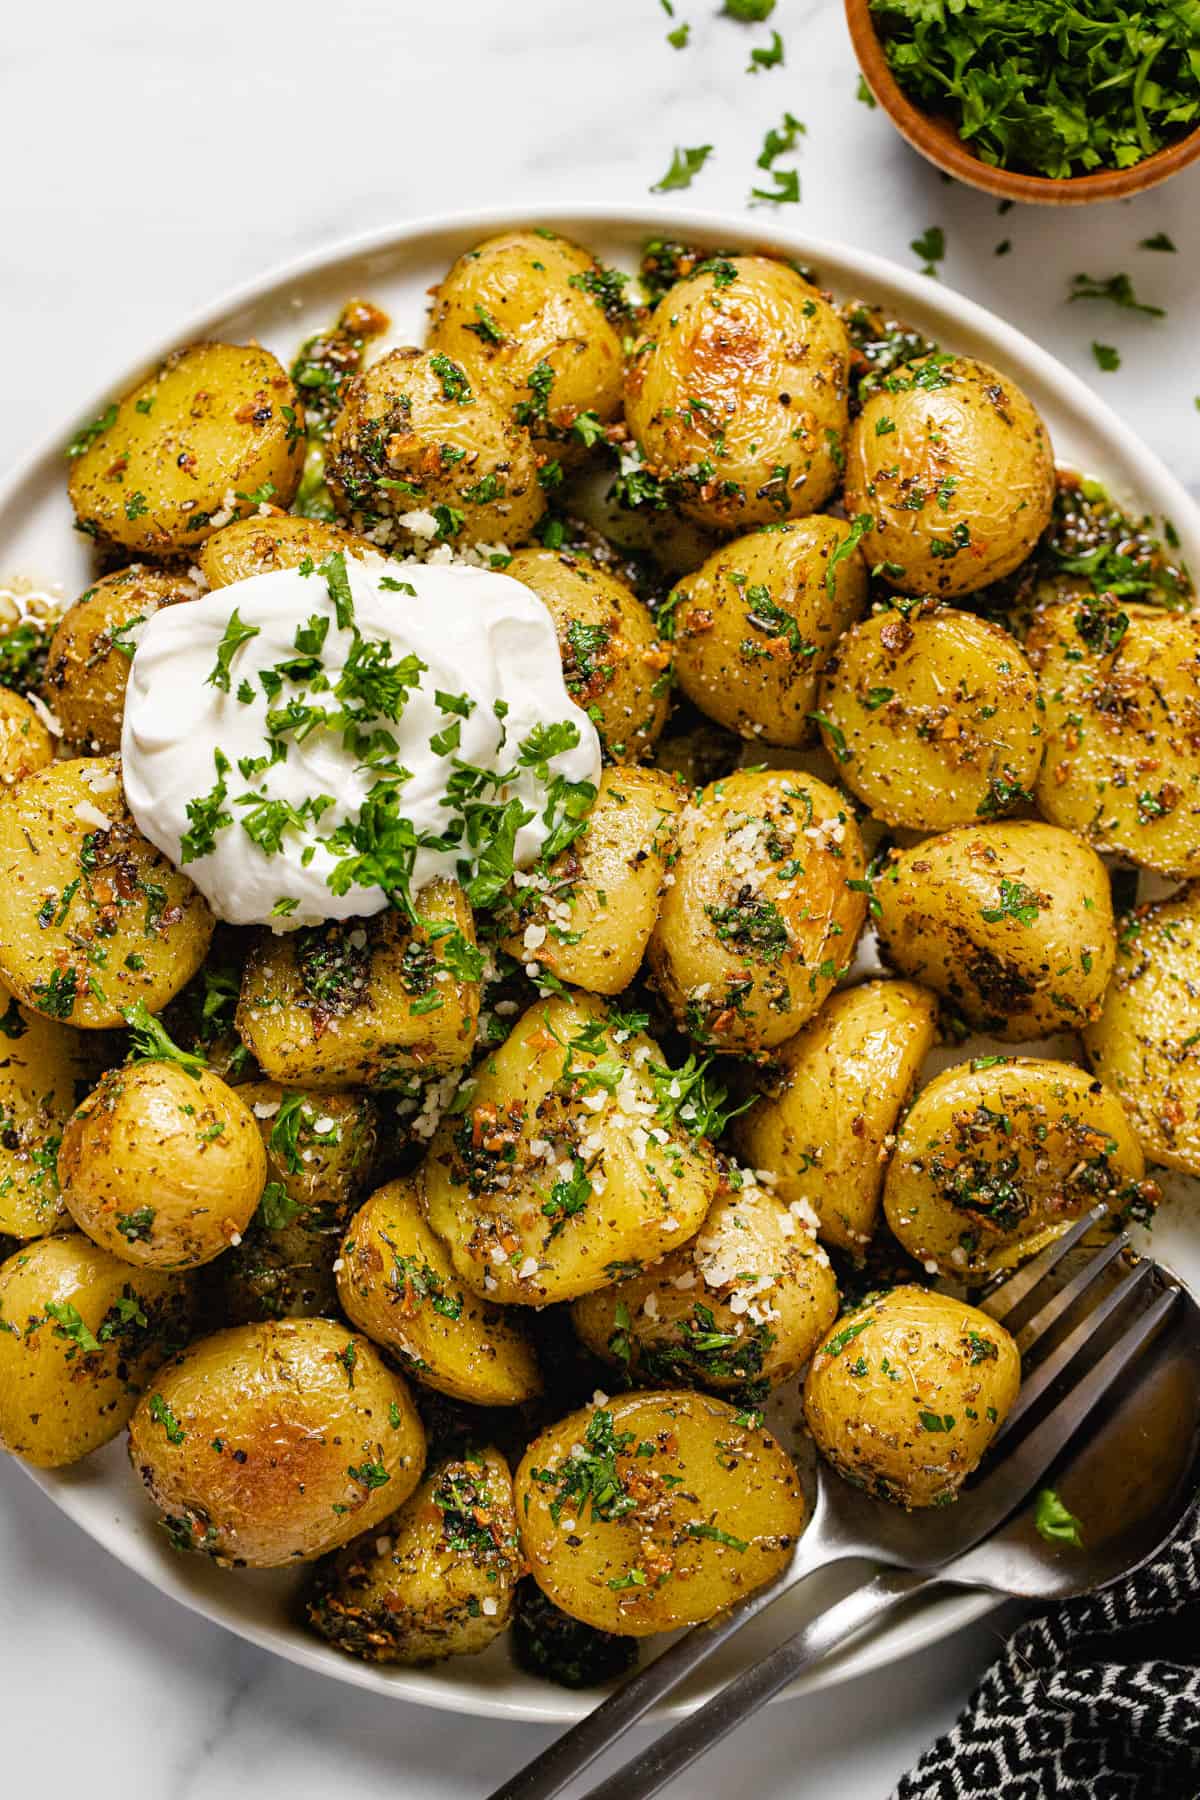 Oven Roasted Baby Potatoes - The Black Peppercorn